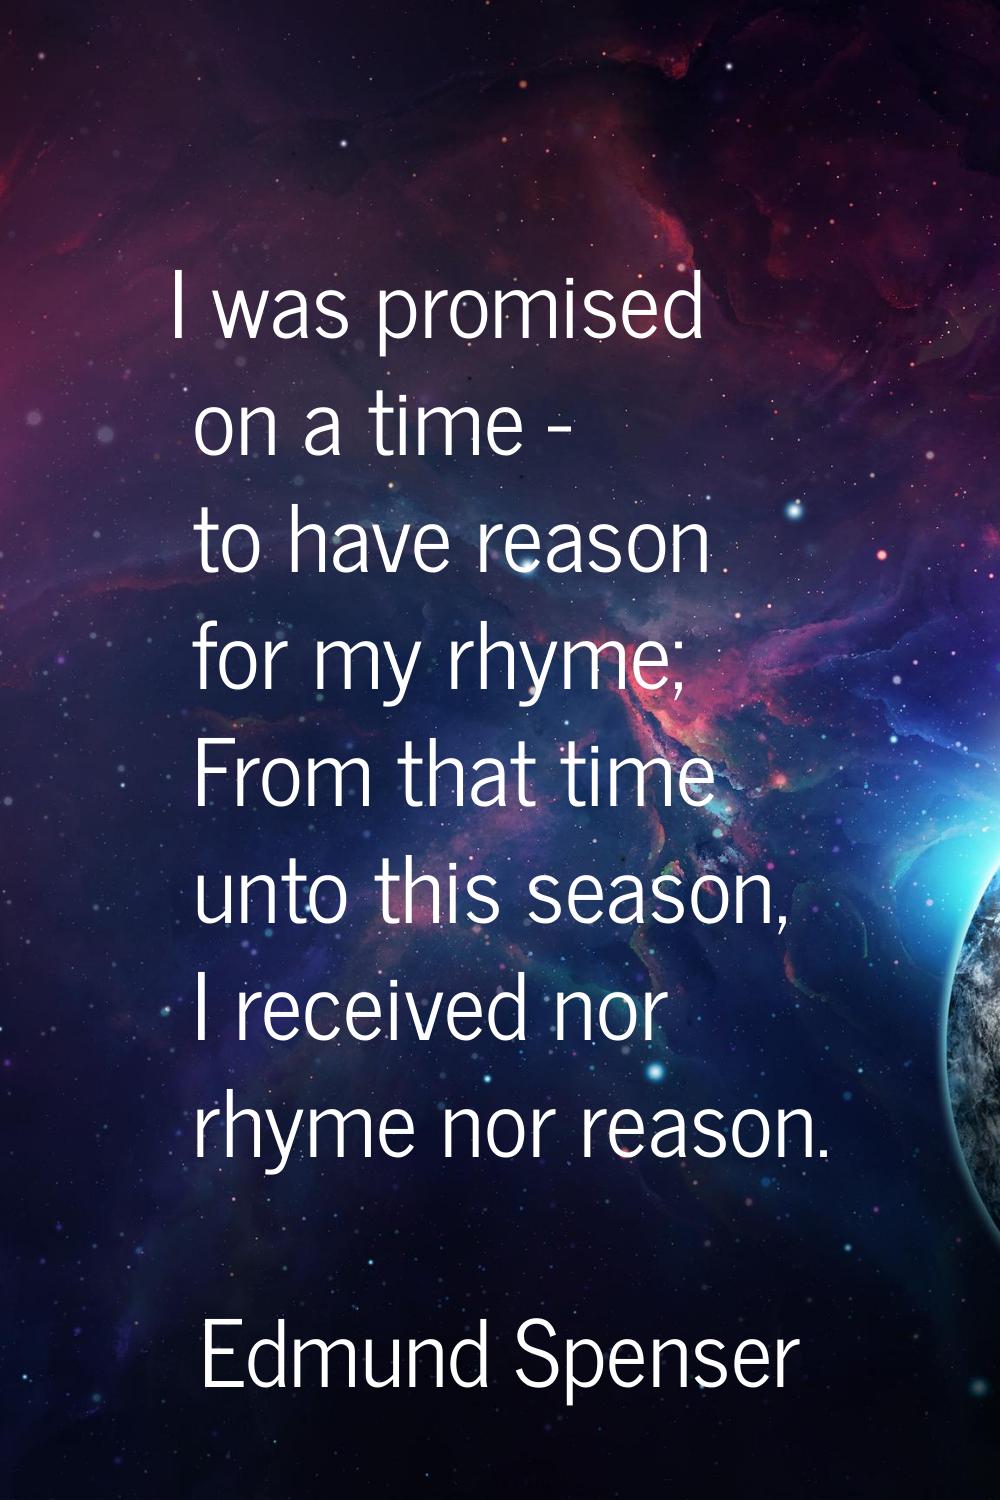 I was promised on a time - to have reason for my rhyme; From that time unto this season, I received